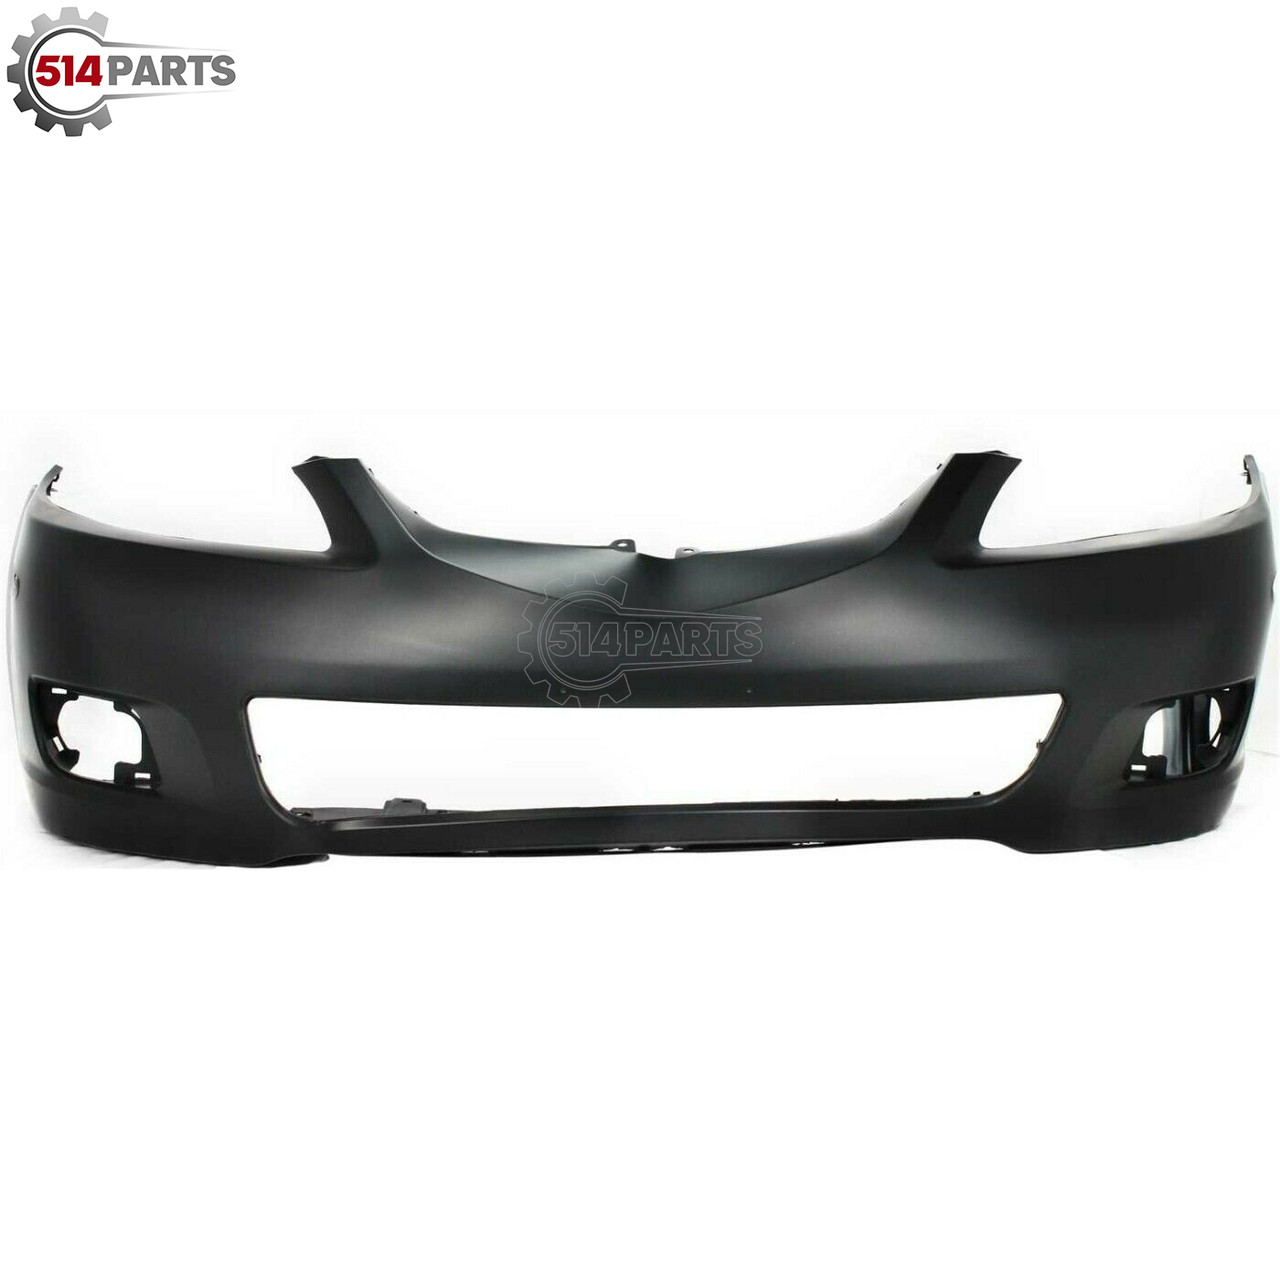 2006 - 2008 MAZDA 6 FRONT BUMPER COVER without SPOILER - PARE-CHOCS AVANT